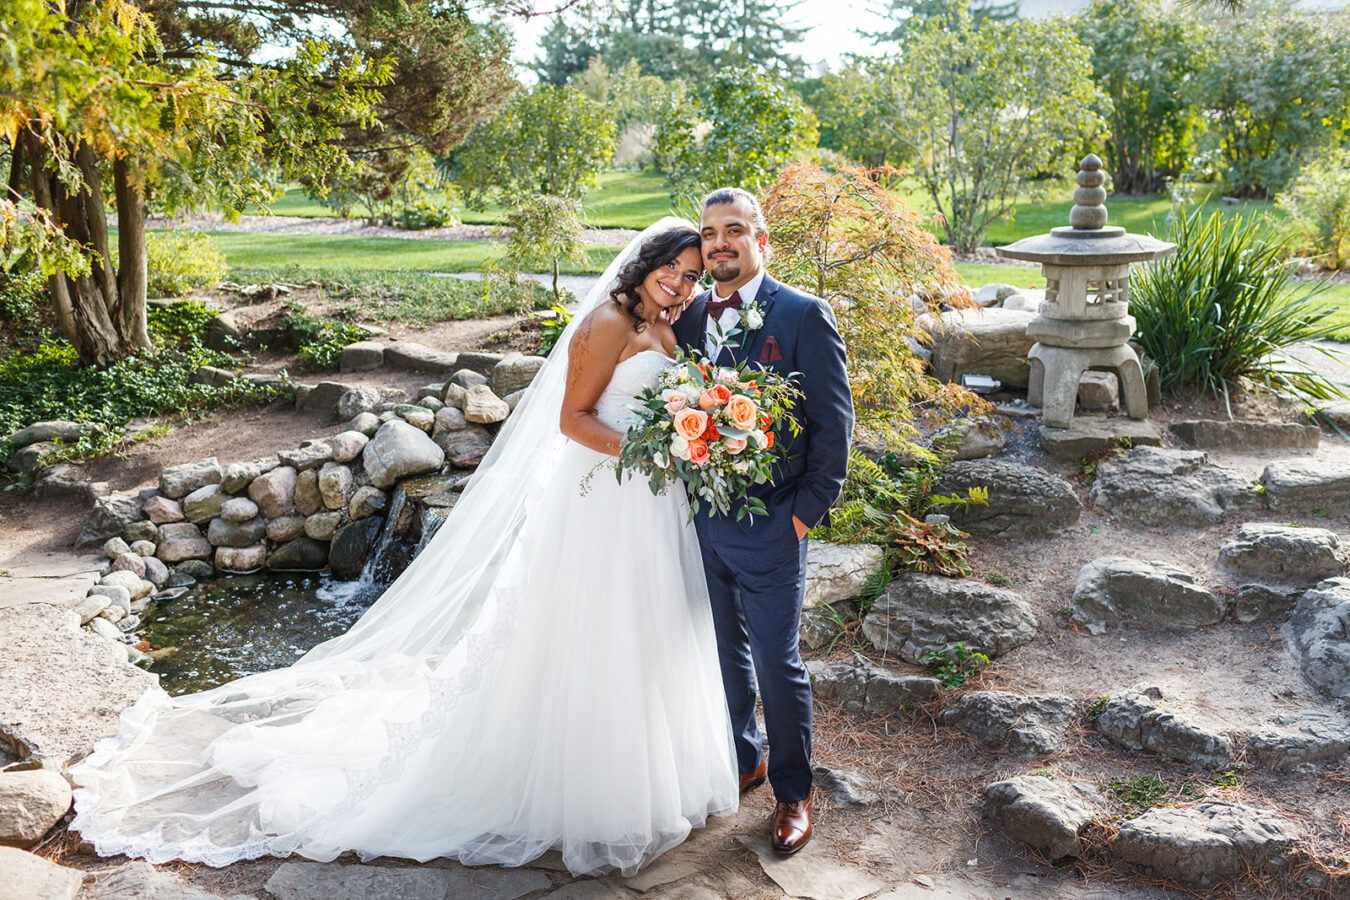 A couple stands together on their Ottawa wedding day. The bride wears a white dress and the foliage is green with a river and garden in the background.